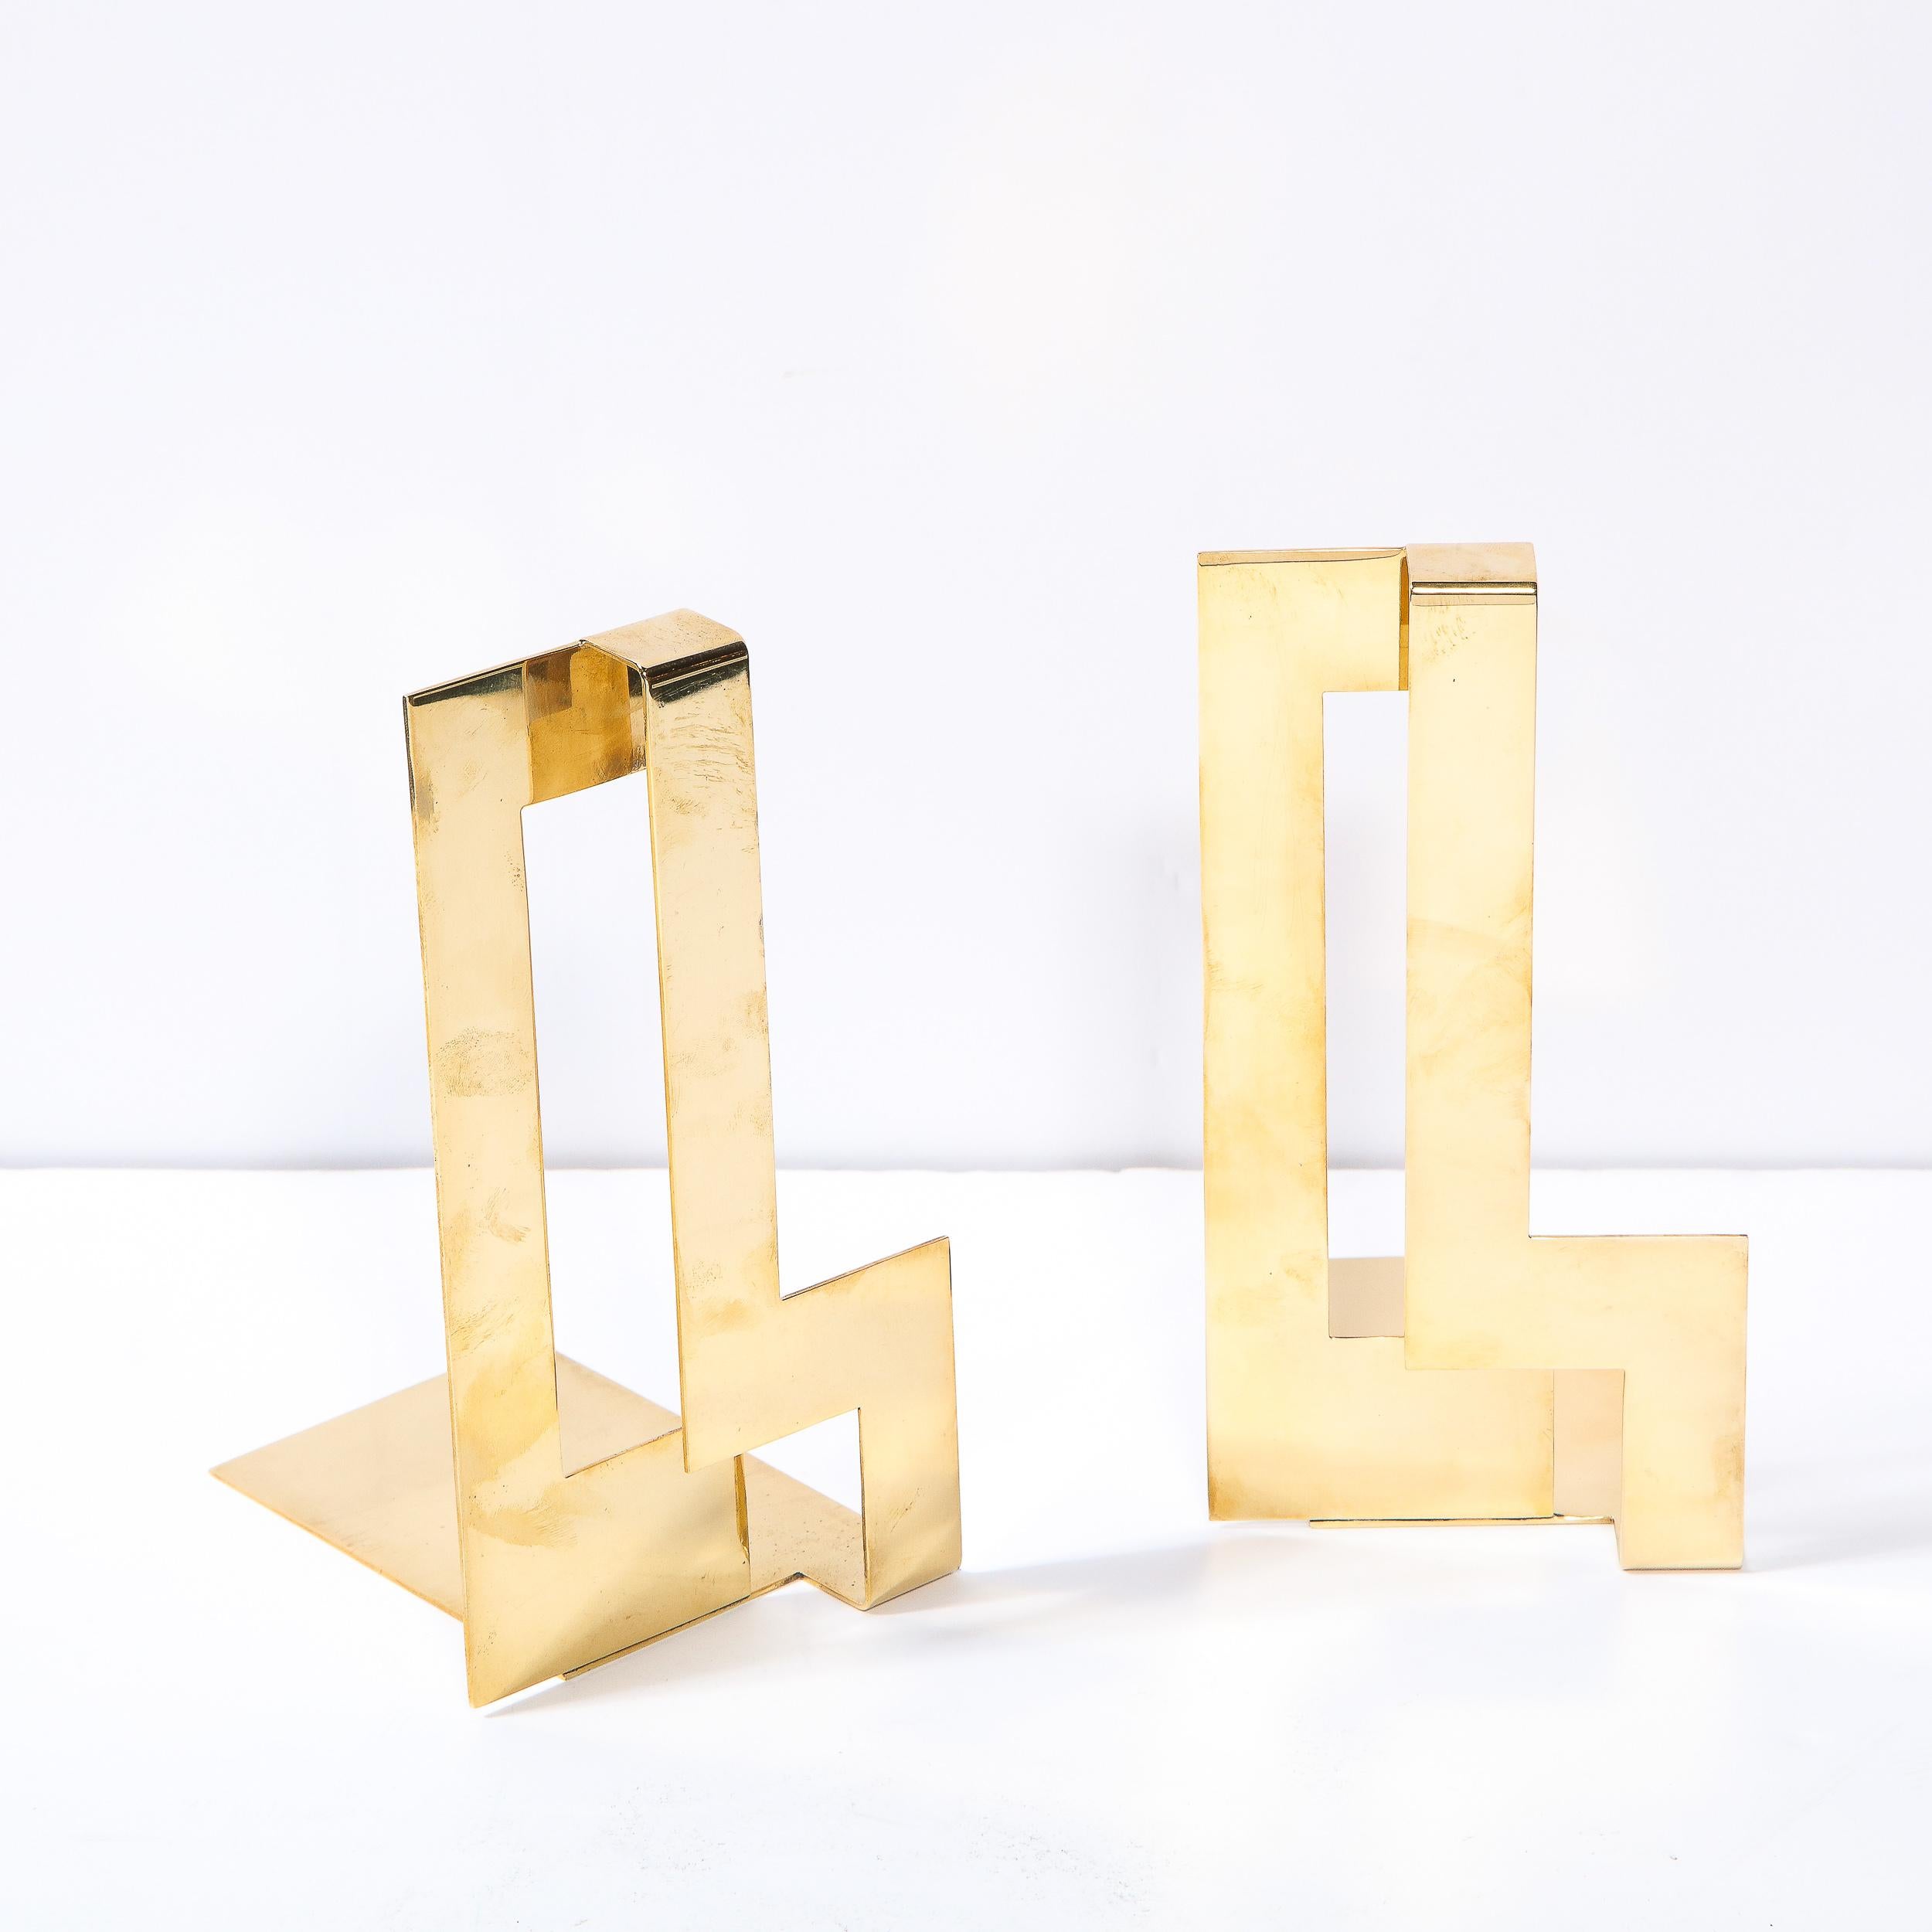 This stunning pair of Scandinavian modernist bookends were realized by the esteemed Swedish maker Skultana during the latter half of the 20th century. They offer dynamic rectilinear forms in lustrous polished brass. With their hardedge geometry and